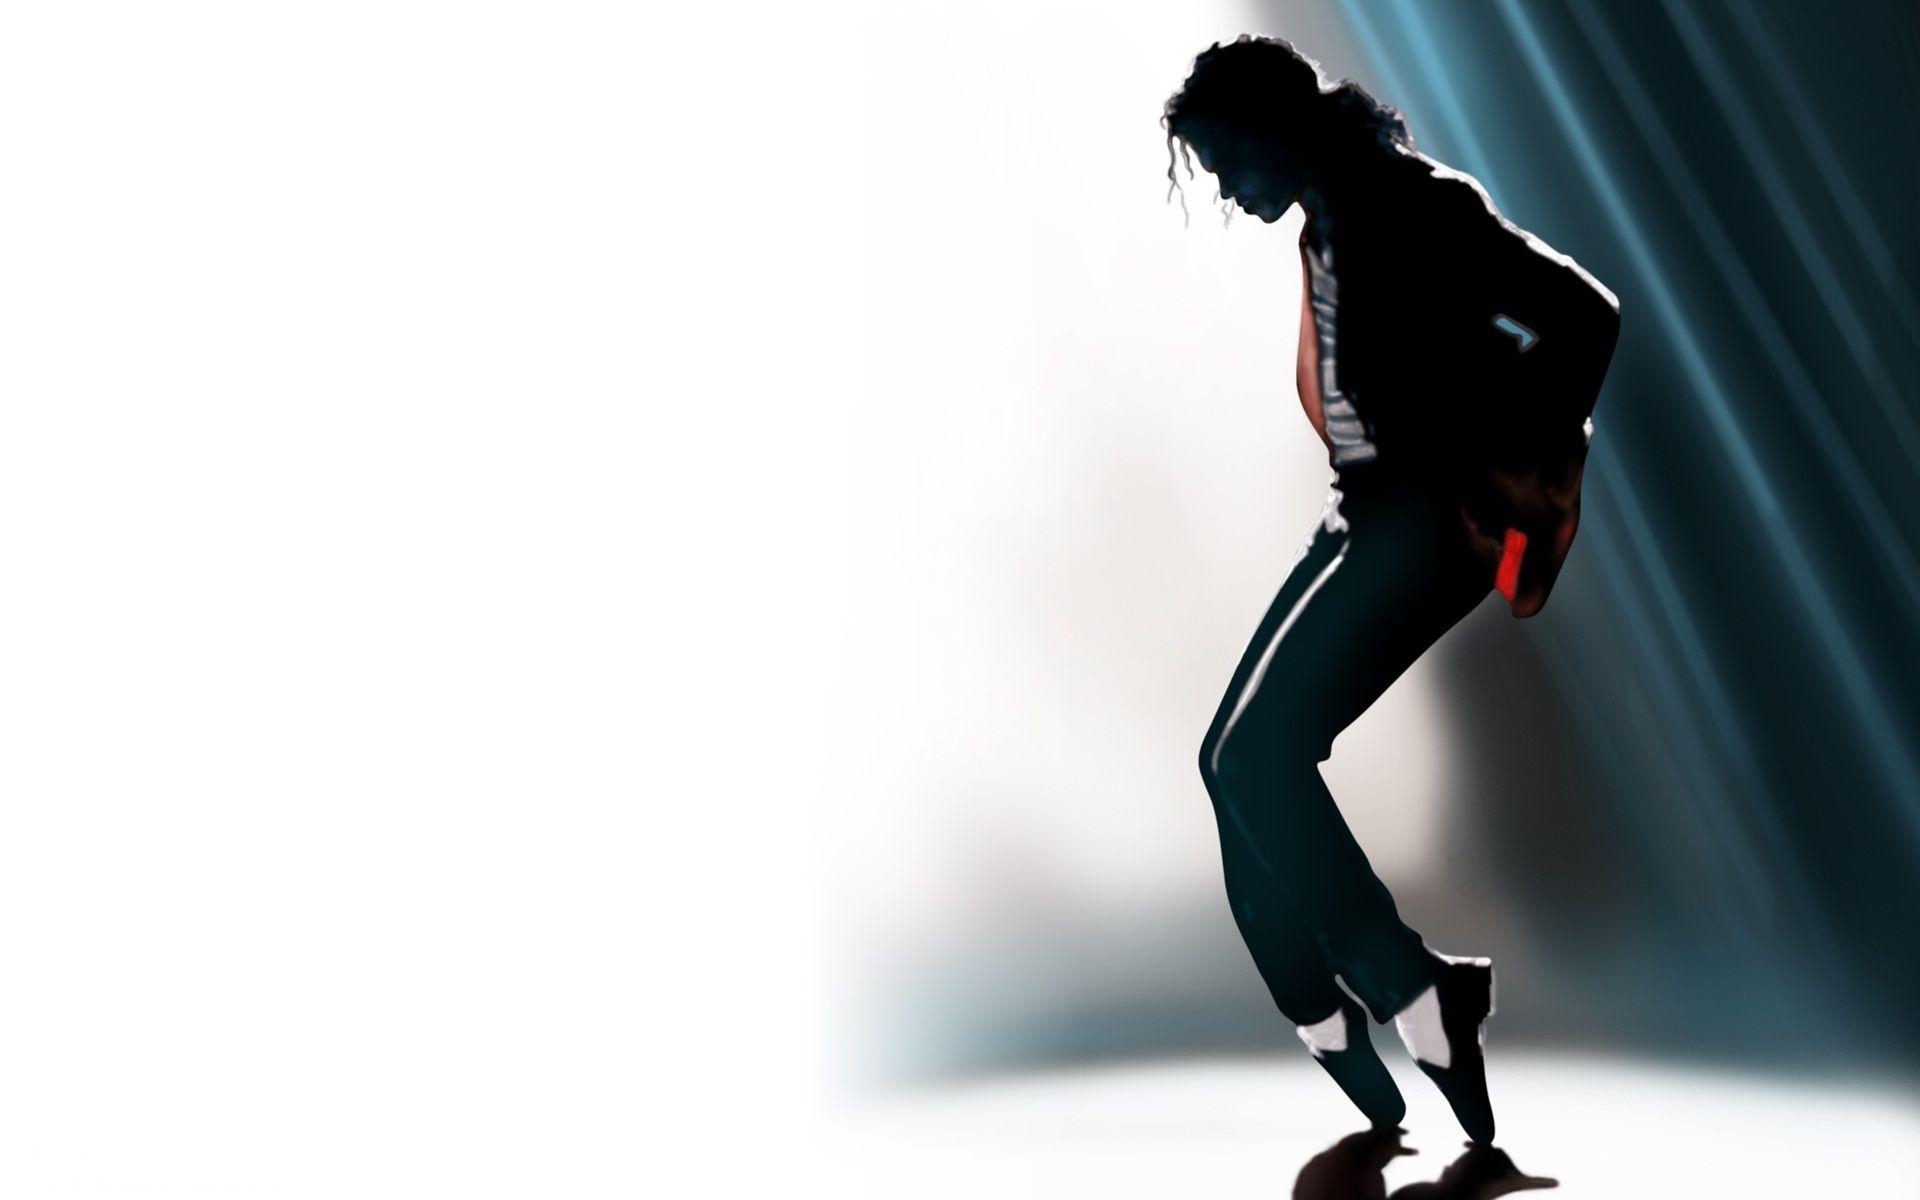 Michael Jackson Wallpapers For Computer Wallpaper Cave Riset